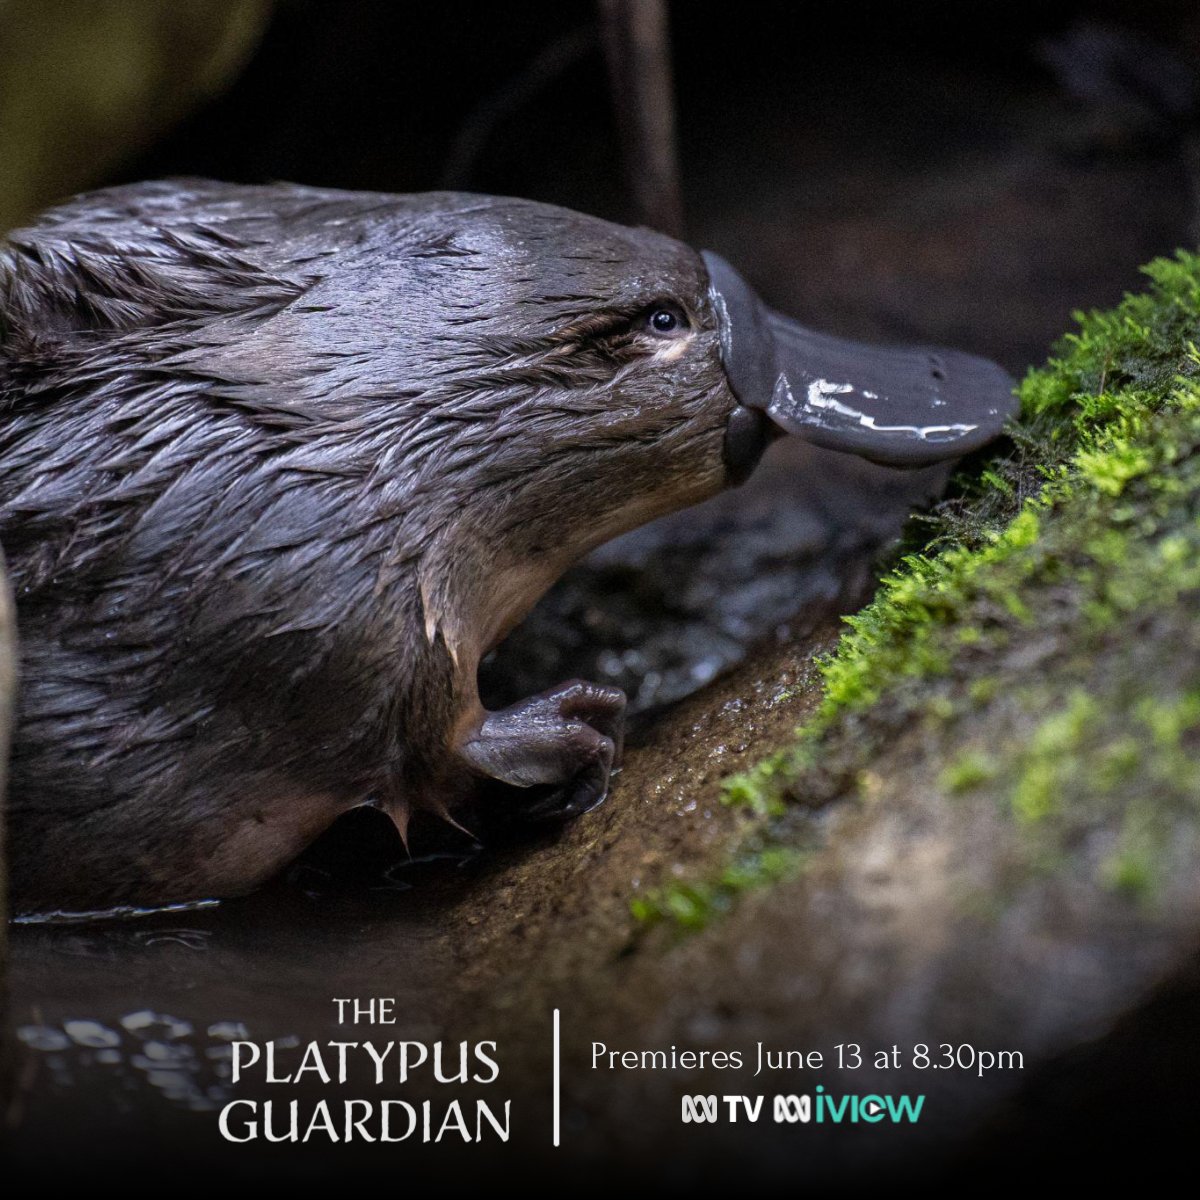 It's been a joy and an honour to be involved with this beautiful film for the past year.  It's the kind of doco that will both uplift & inspire people to care for our creatures and the waterways so critical for their survival. #documentary #platypus @WildBearEnt #abctv